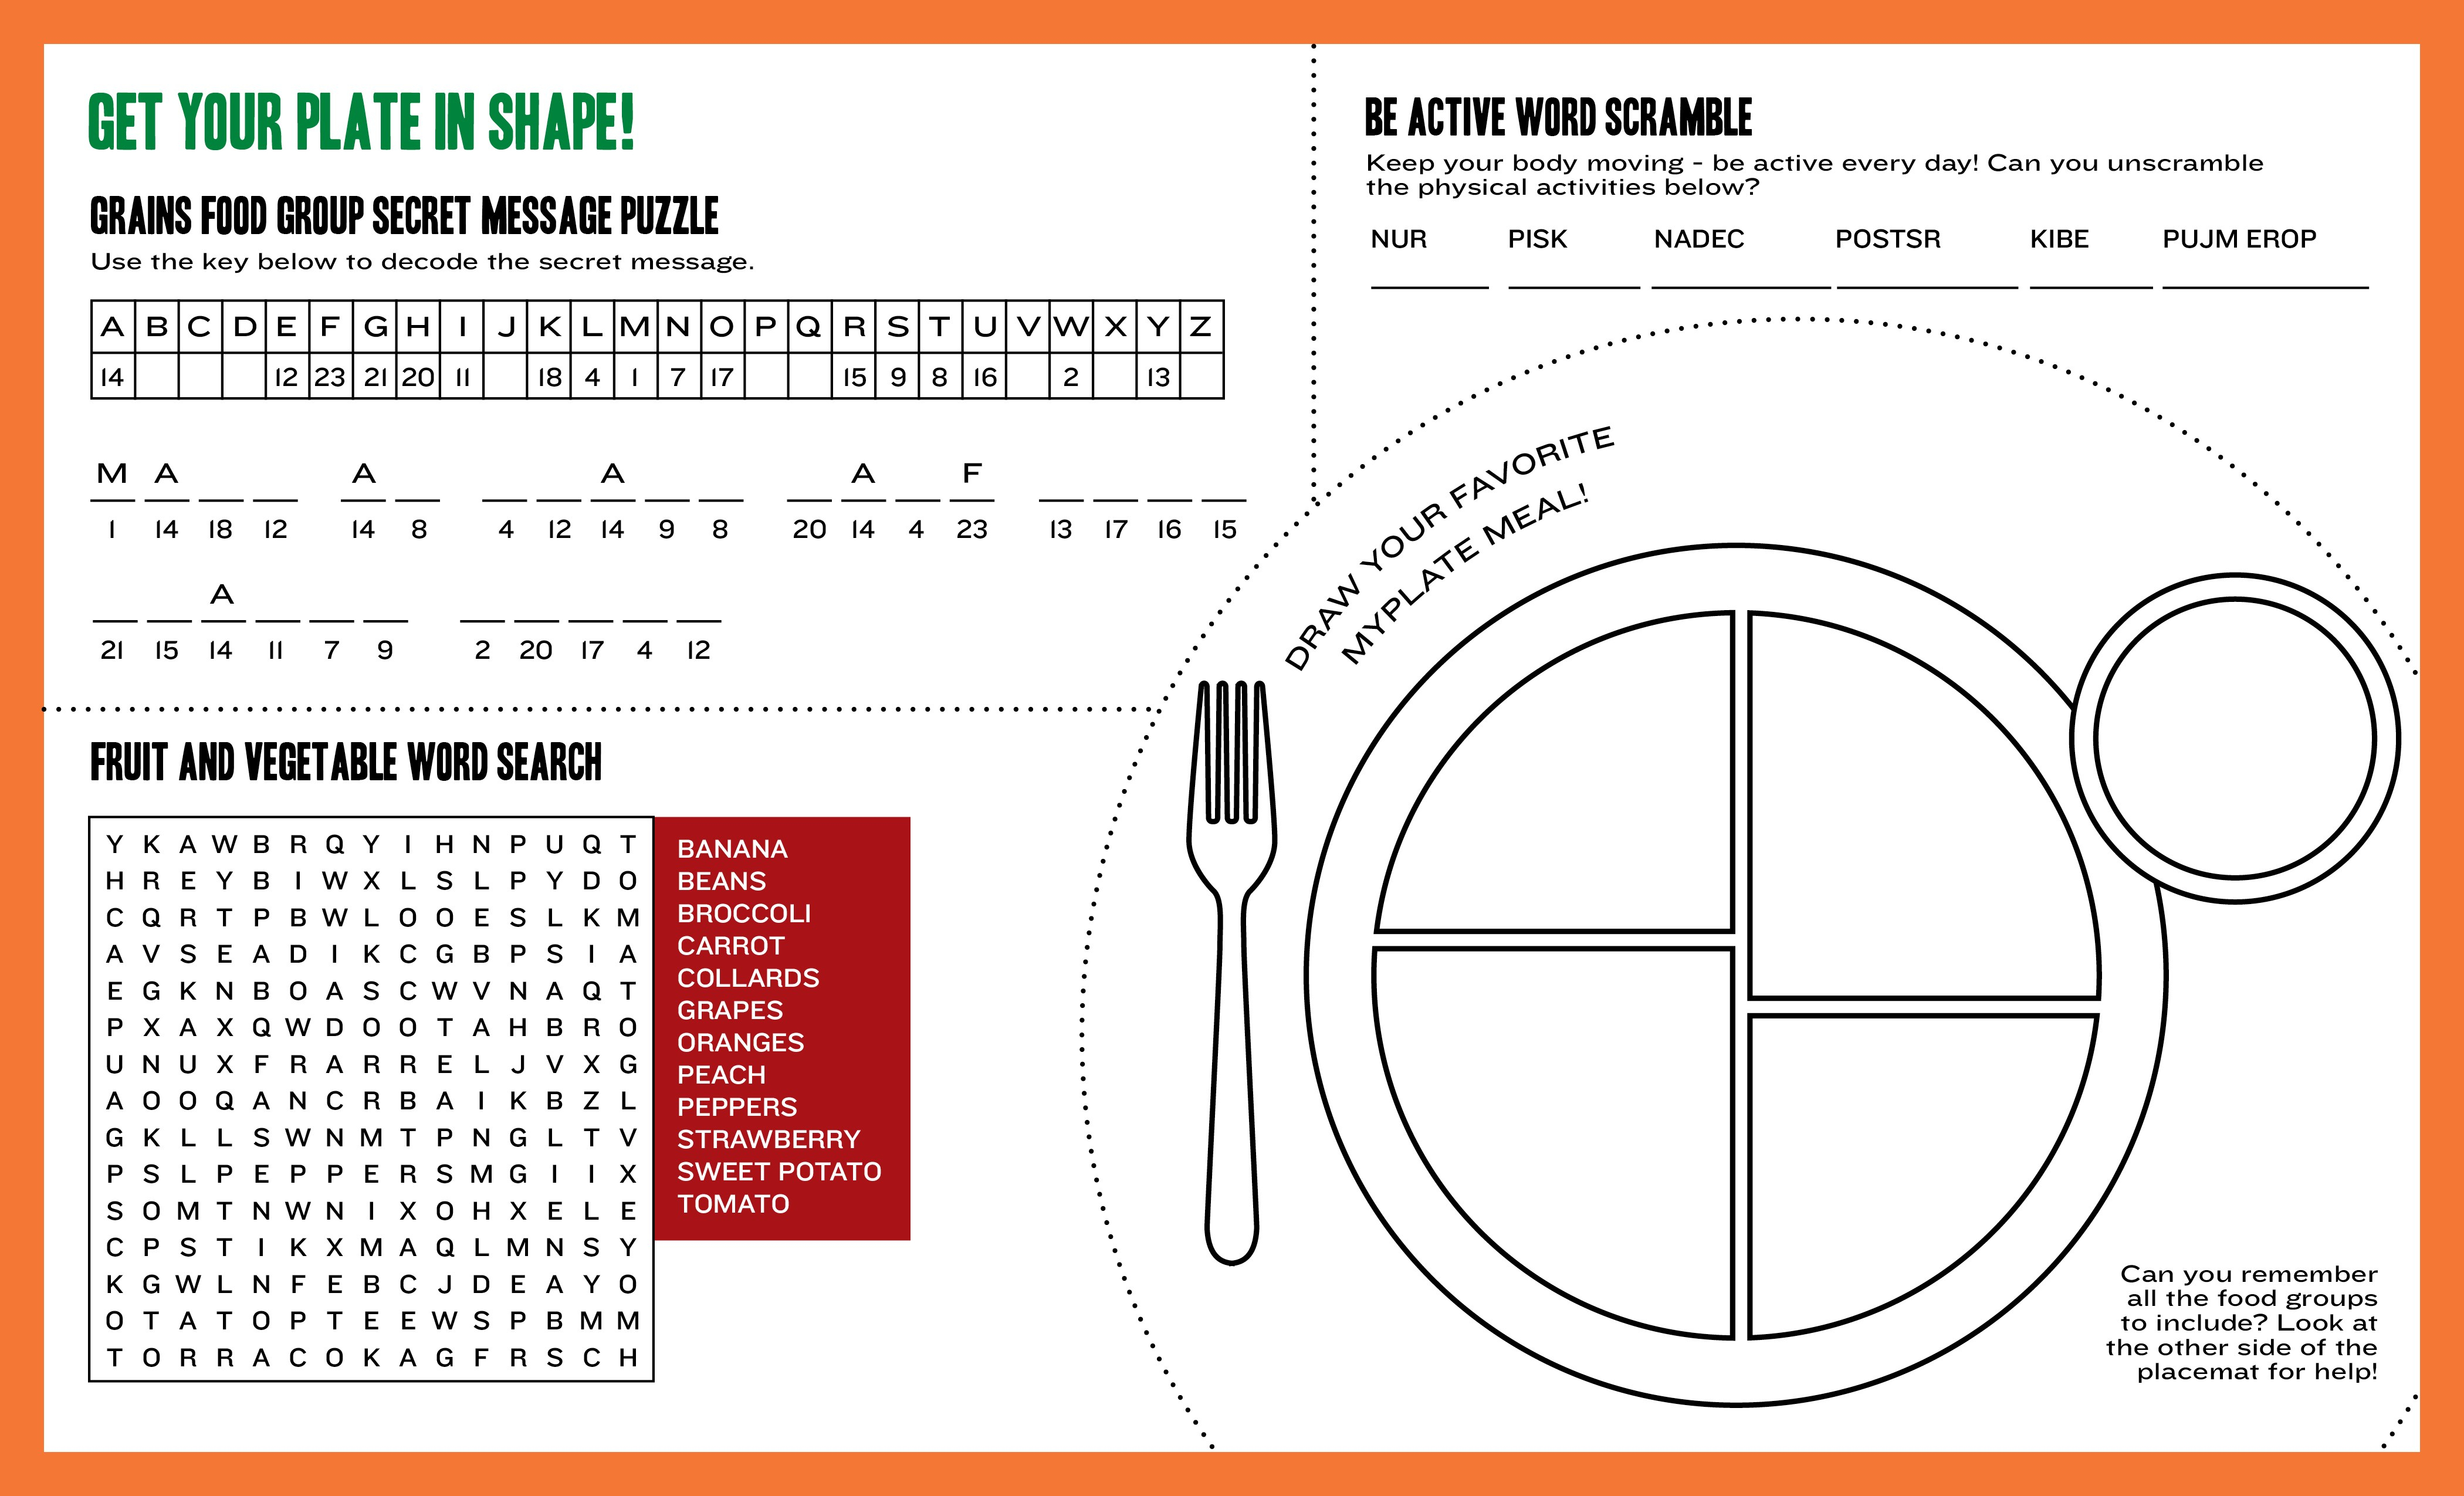 Healthy Plate Template. Empty Food Plate Template Healthy Eating | Choose My Plate Printable Worksheets